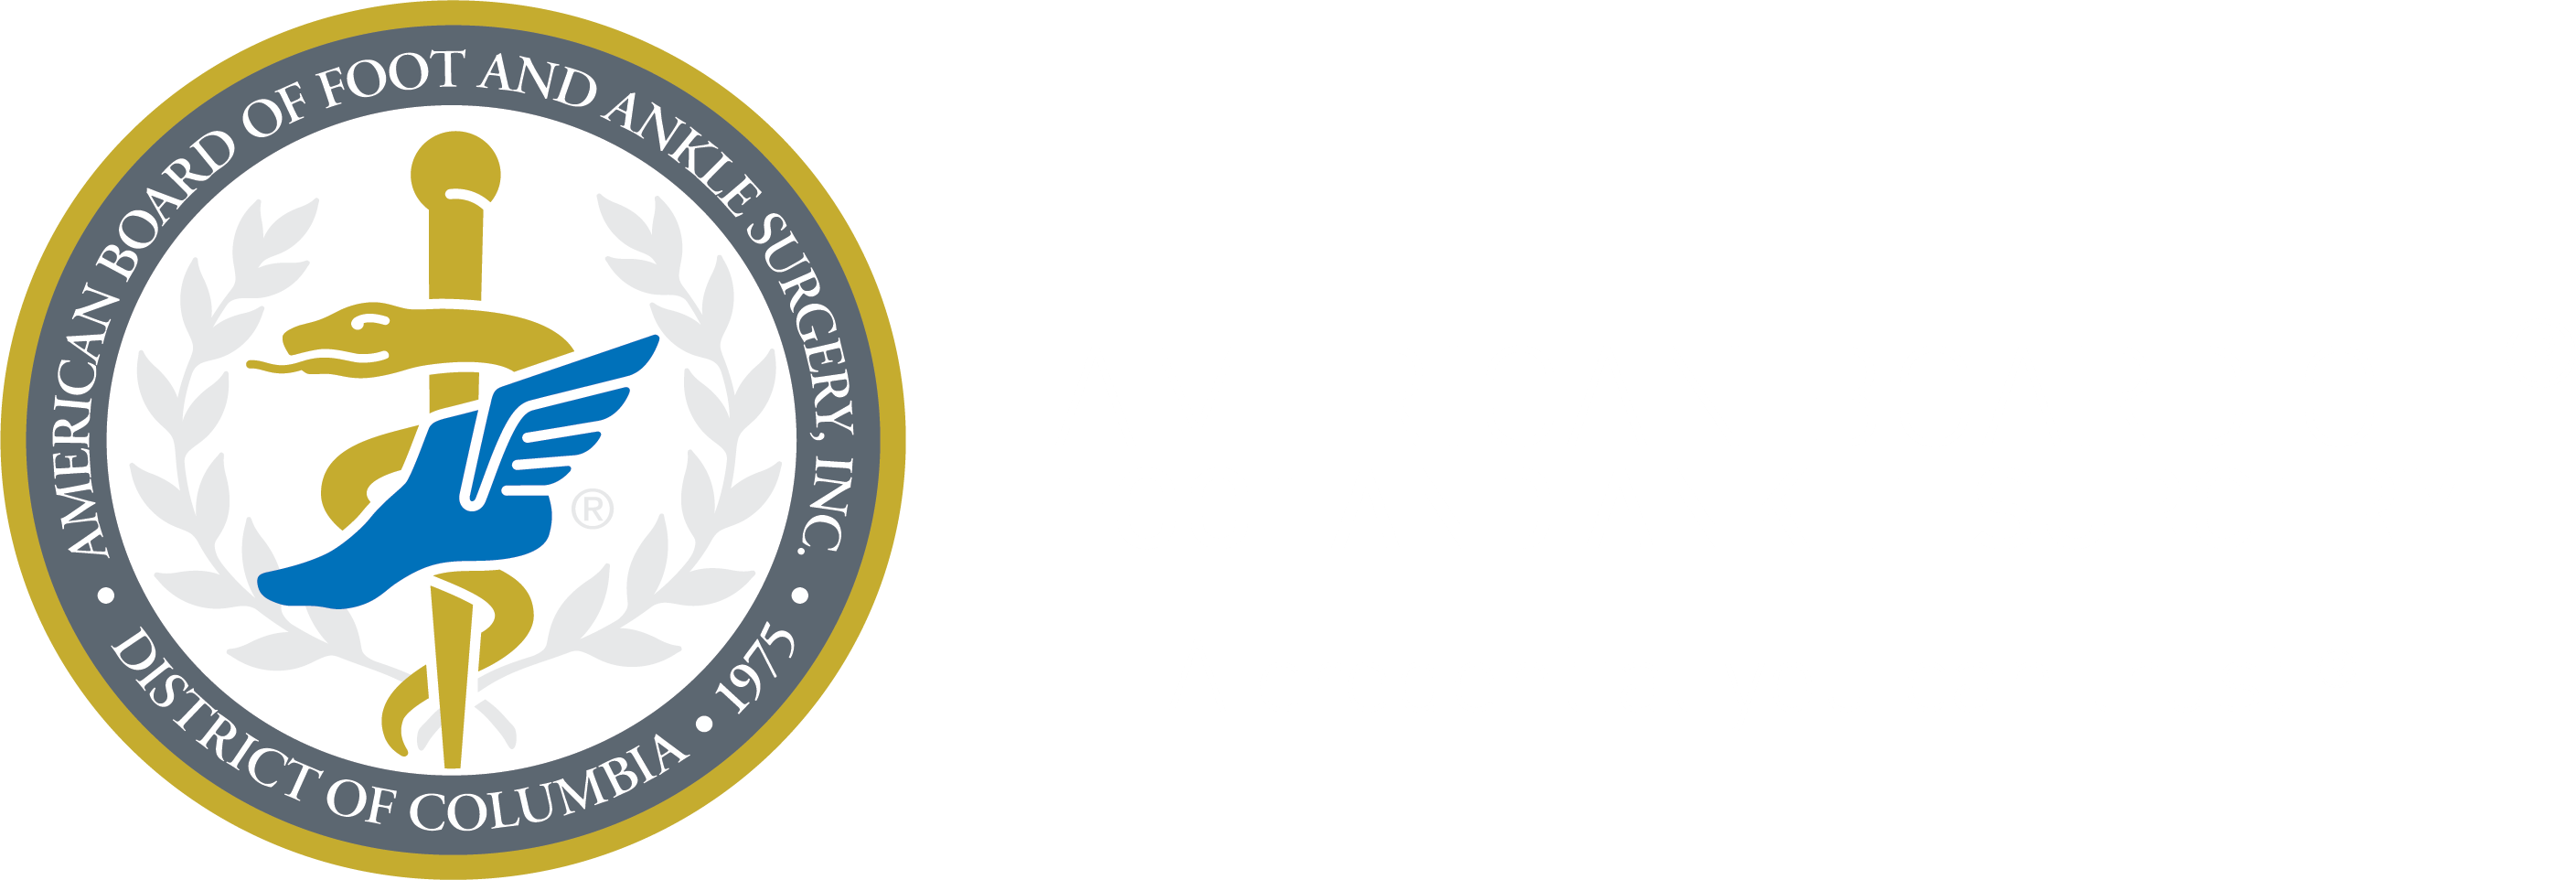 American Board of Foot and Ankle Surgery : A Credential You Can Trust